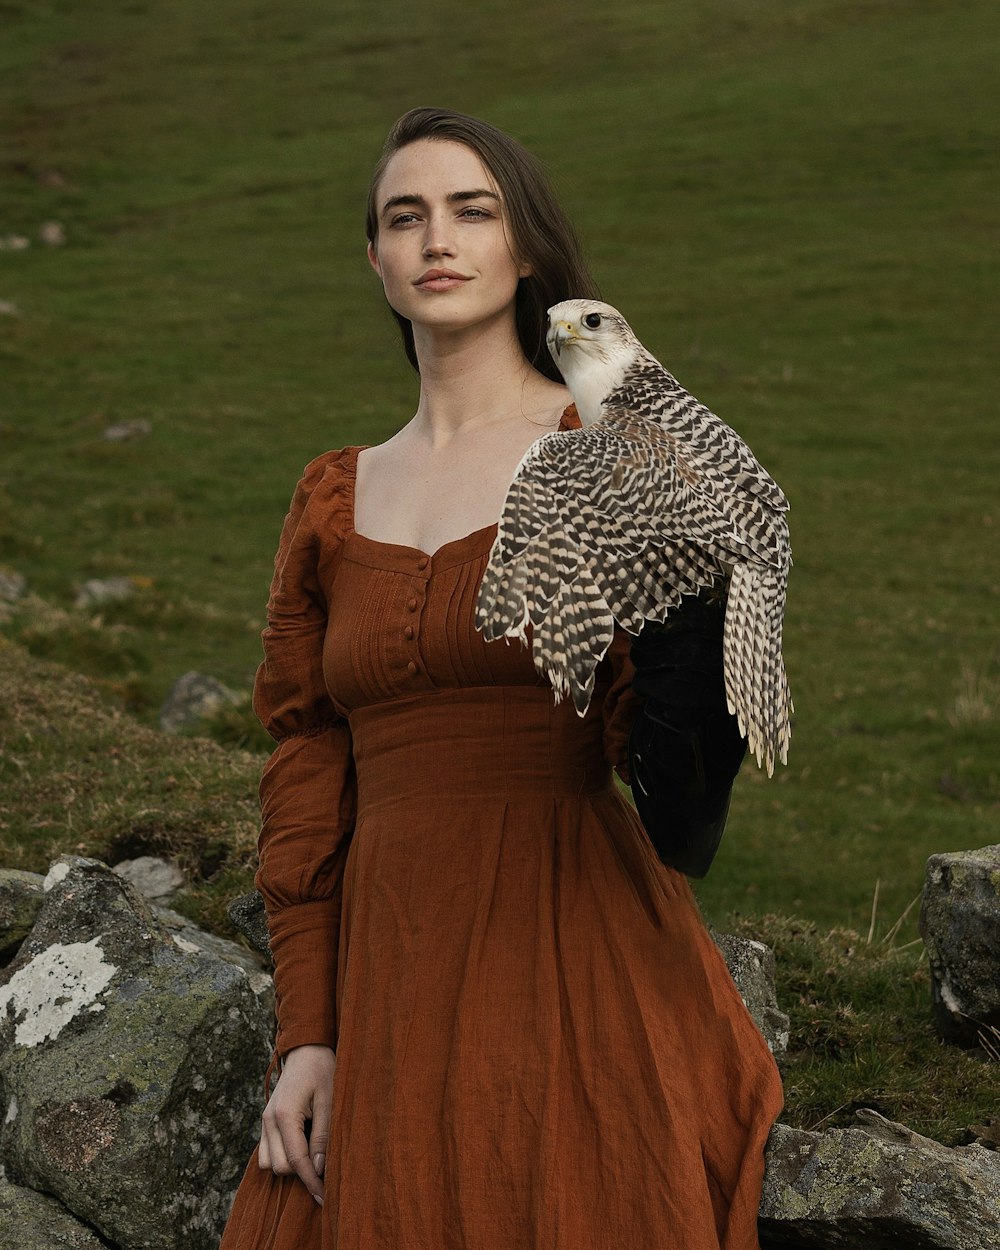 a woman in a brown dress holding a bird of prey